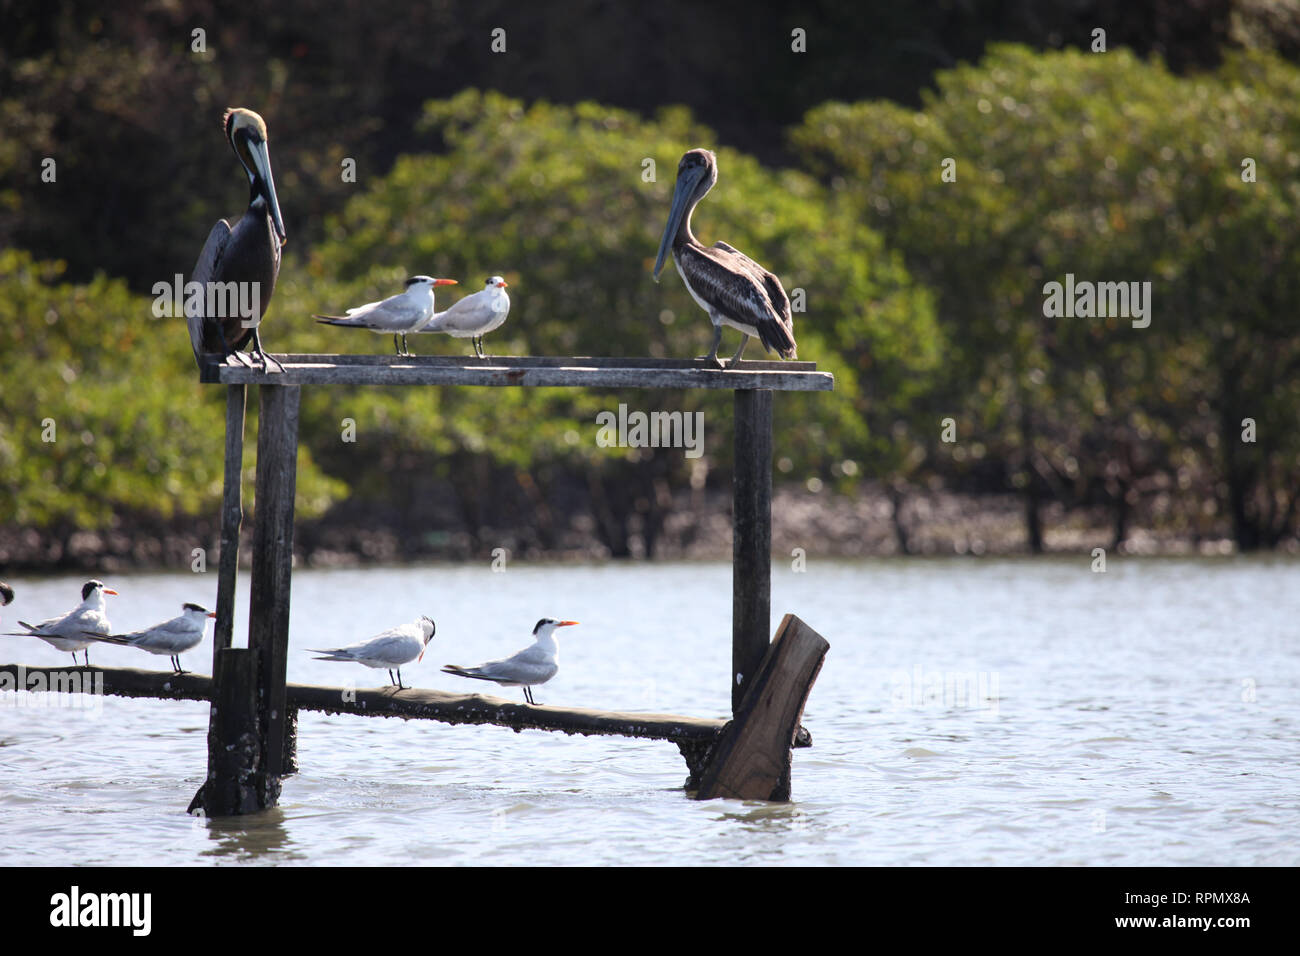 two 2 pelicans sitting on wooden stands, costa rica, south america, Stock Photo